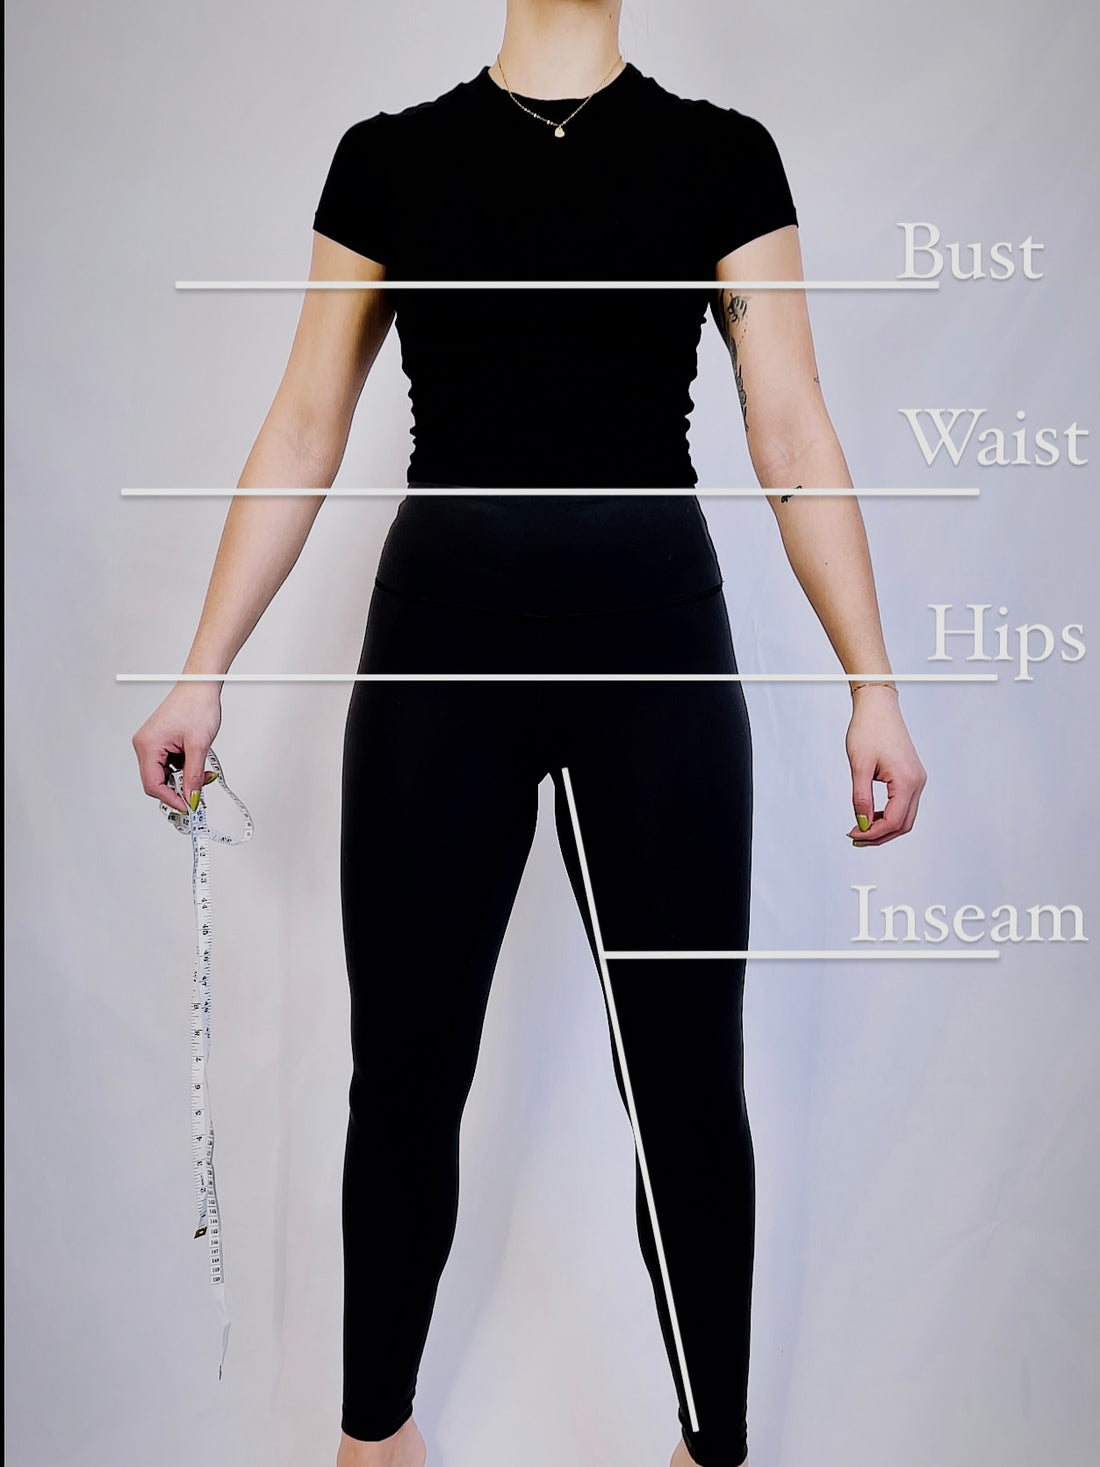 What are all these measurements and what do they mean? – Heck Yes